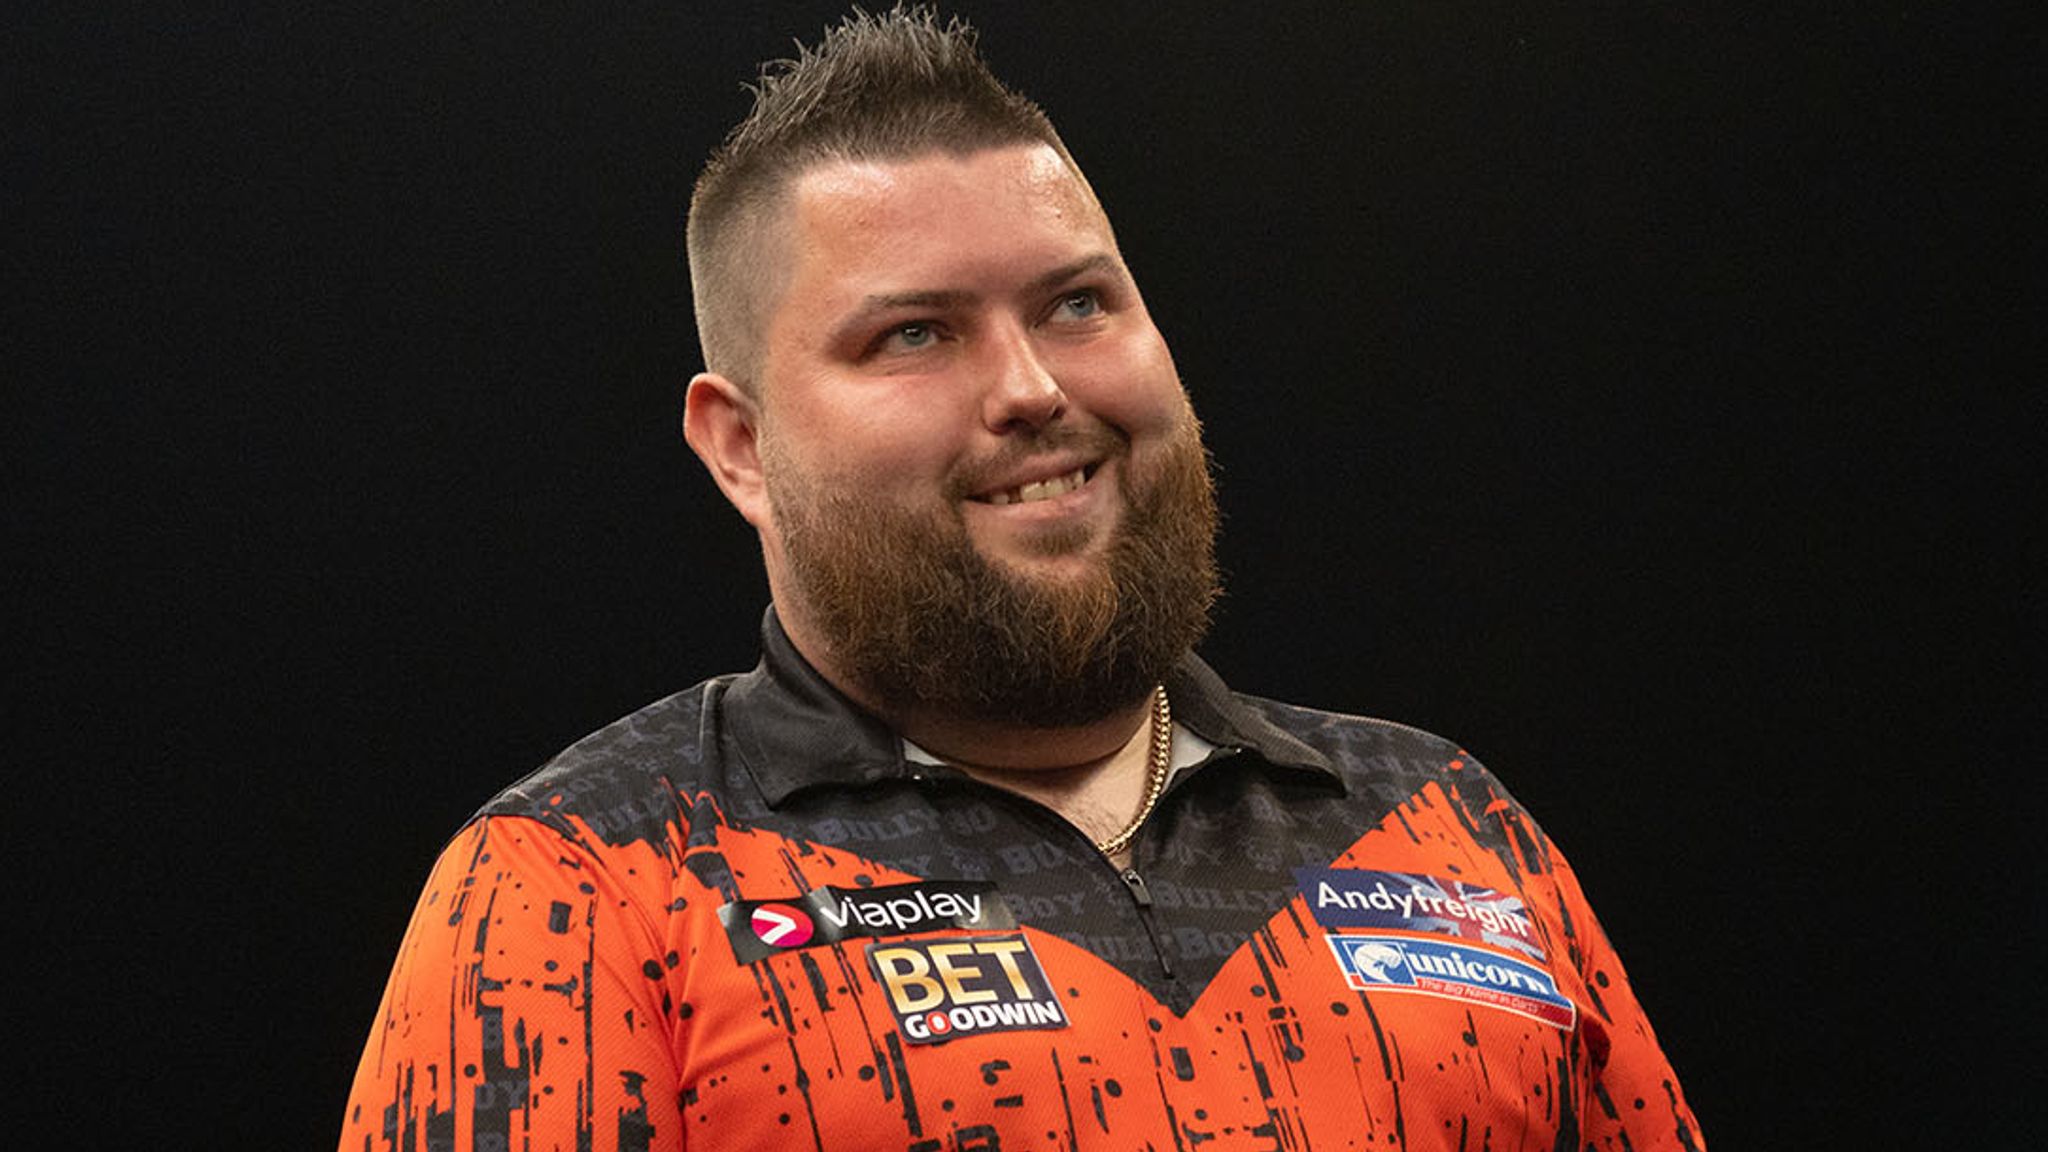 Players Michael Smith clinches third Pro title in Germany | Darts News | Sports